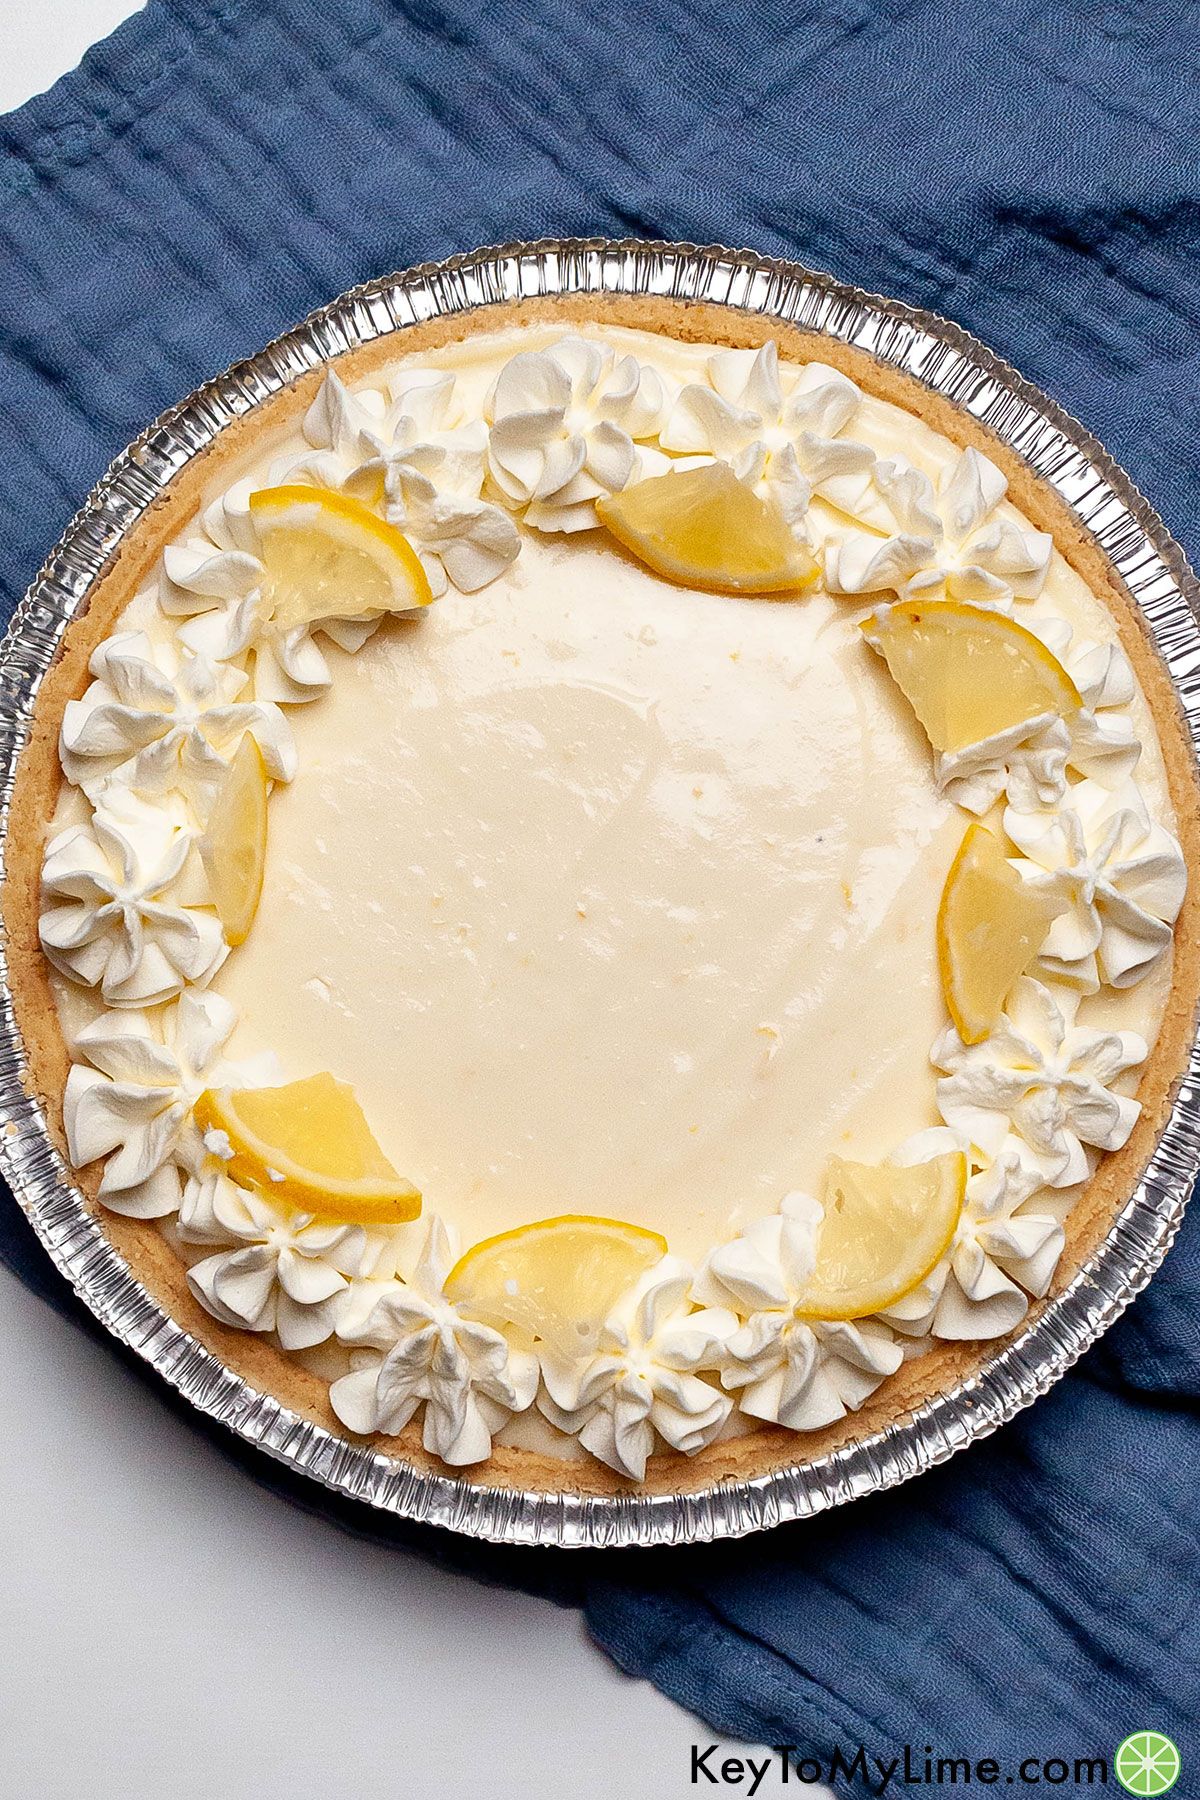 An image of a fully decorated lemon icebox pie in a pie dish on top of a blue napkin.